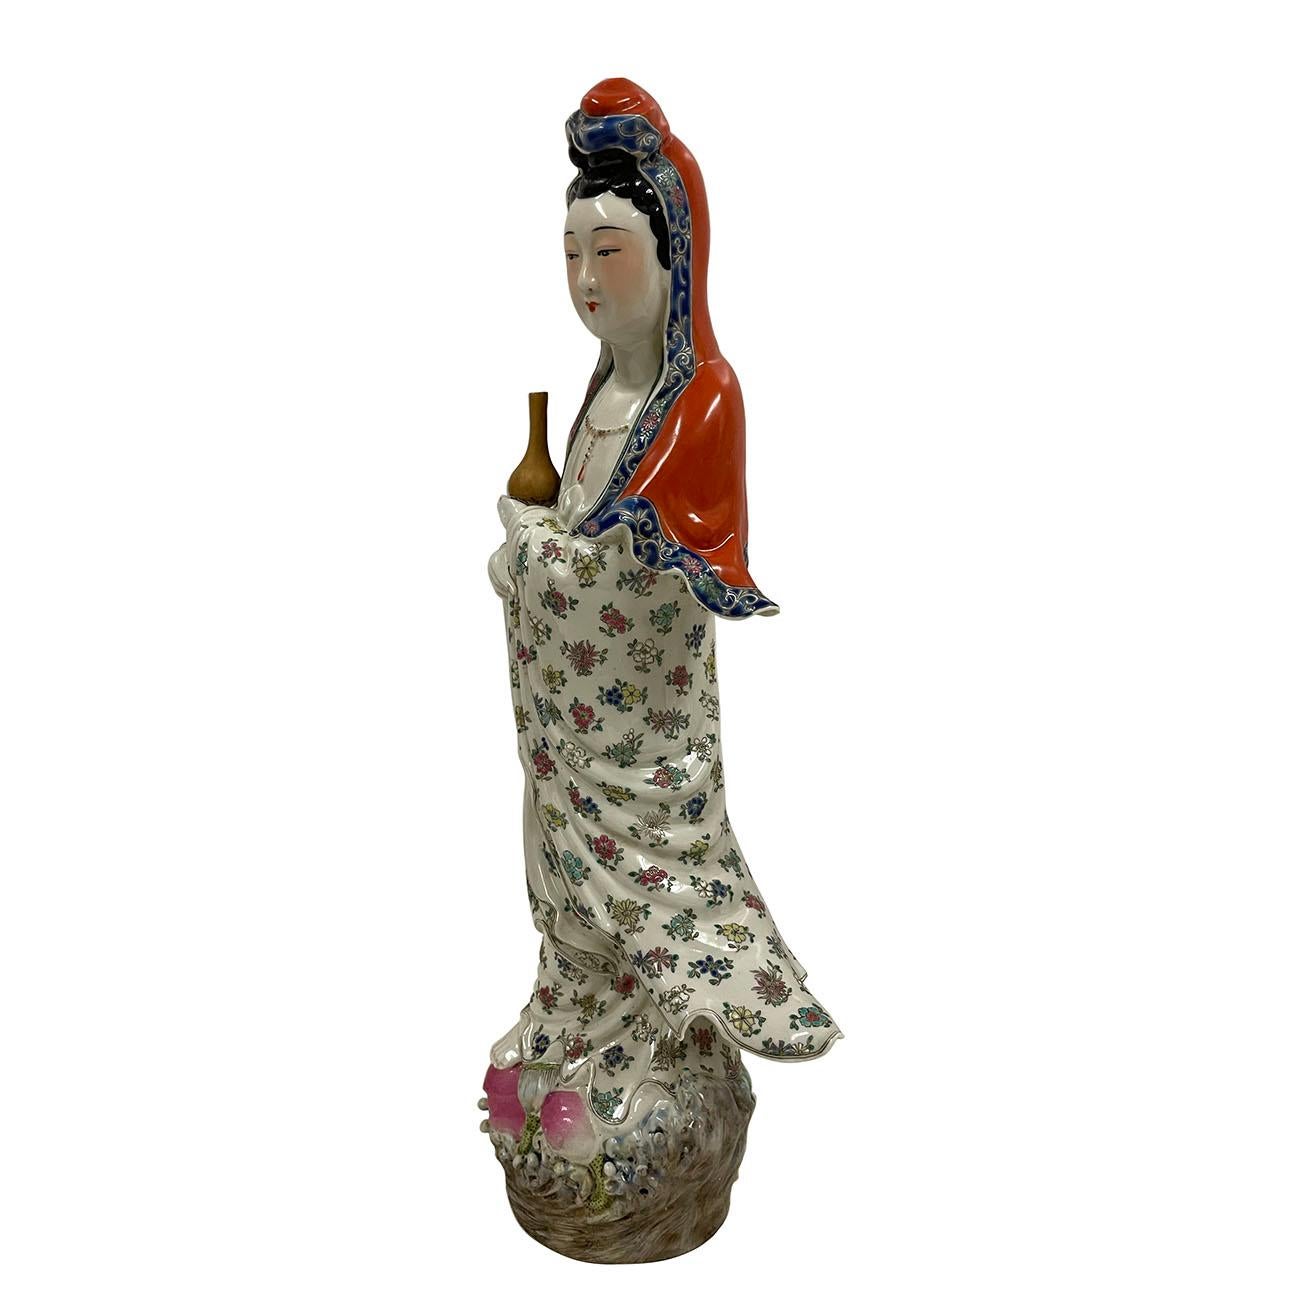 Chinese Export Early 20th Century Antique Chinese Famille-Rose Porcelain Kwan Yin Statuary For Sale